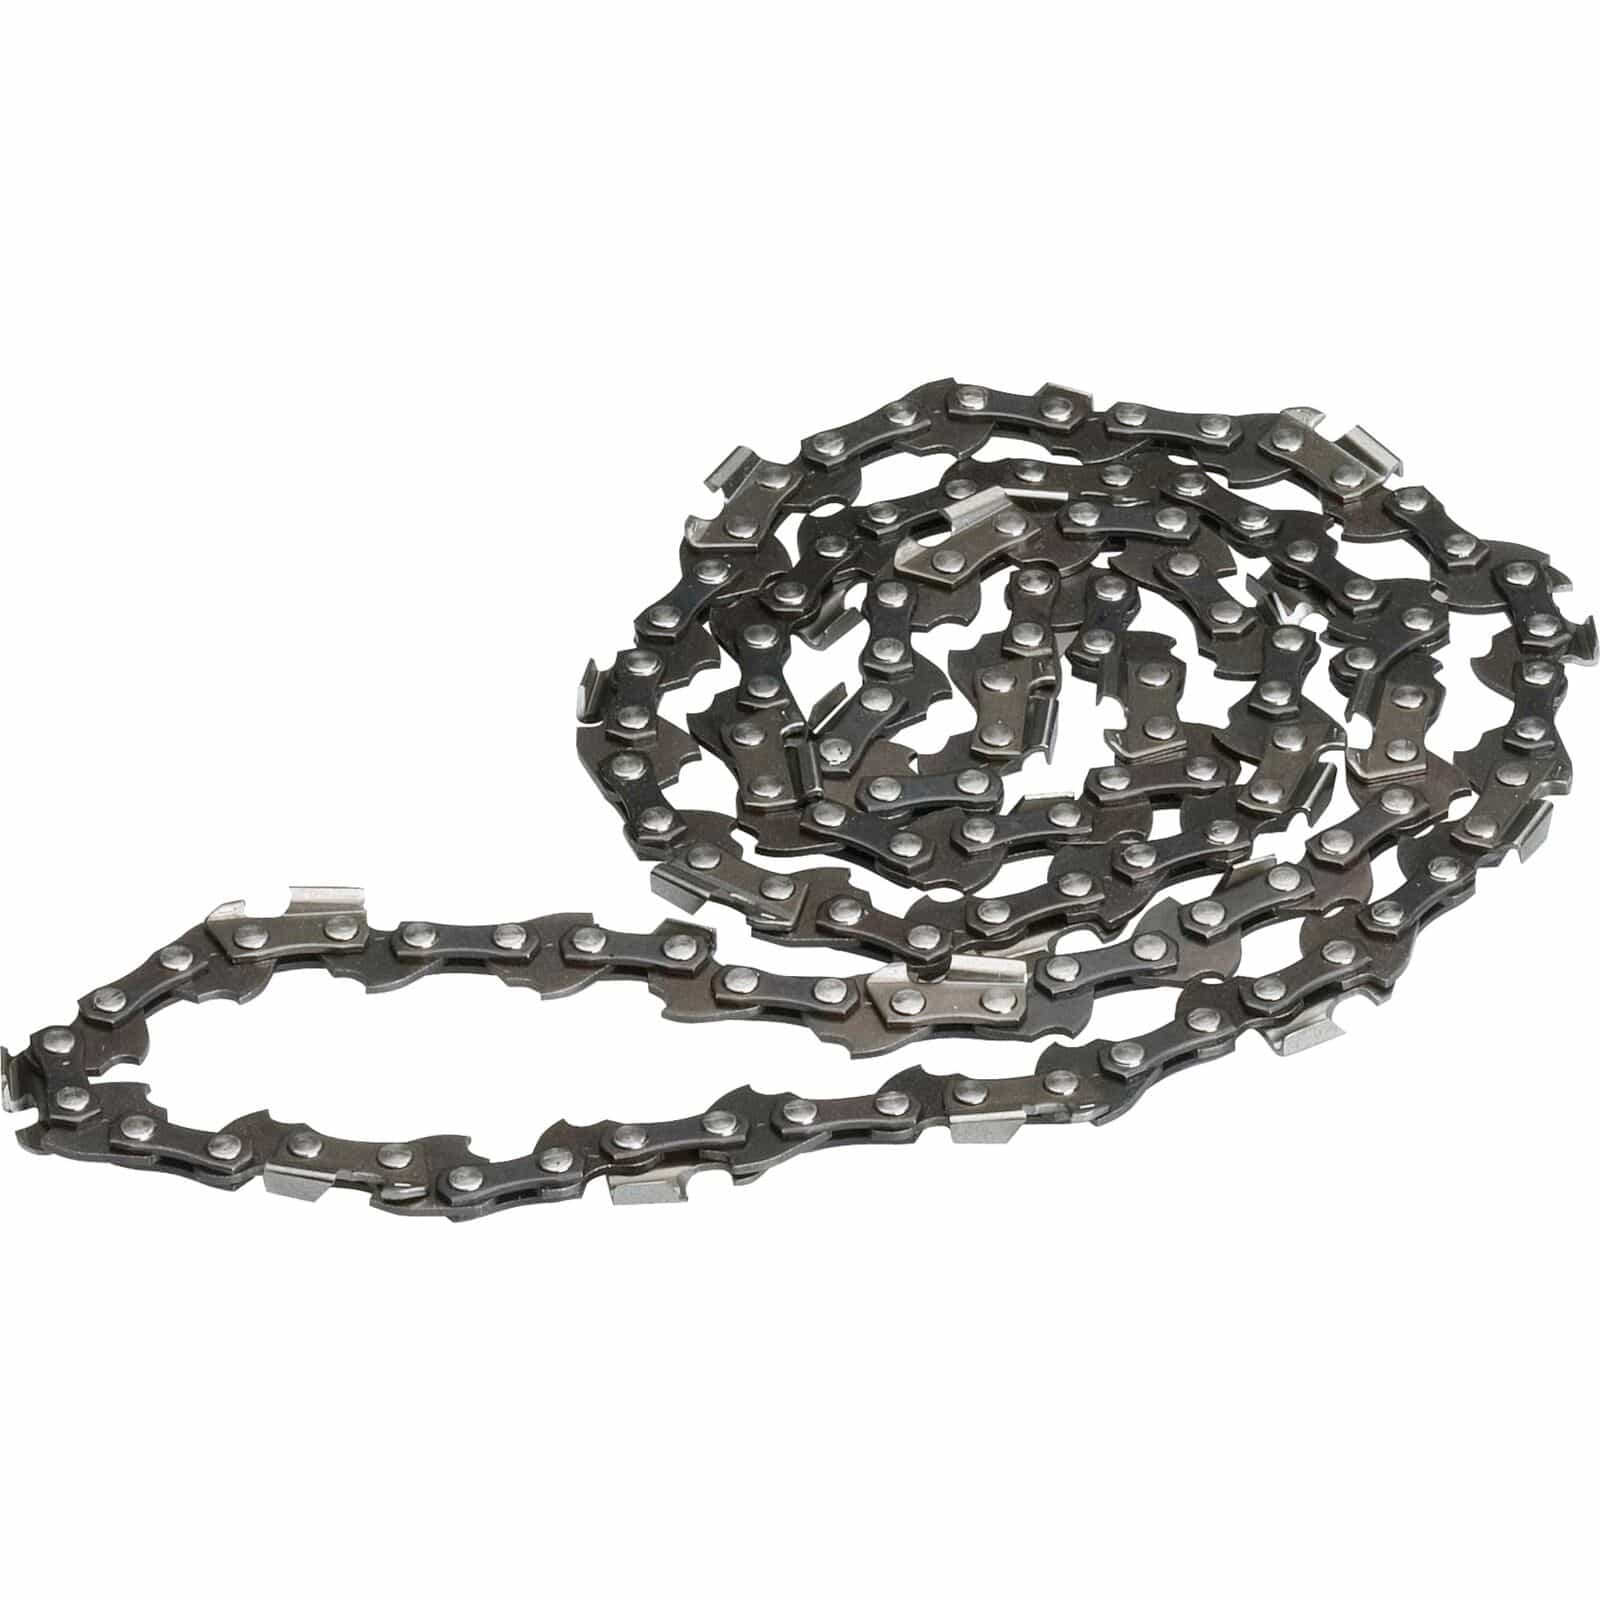 Ingco Saw chain 18" & 24" | Supply Master | Accra, Ghana Tools Building Steel Engineering Hardware tool